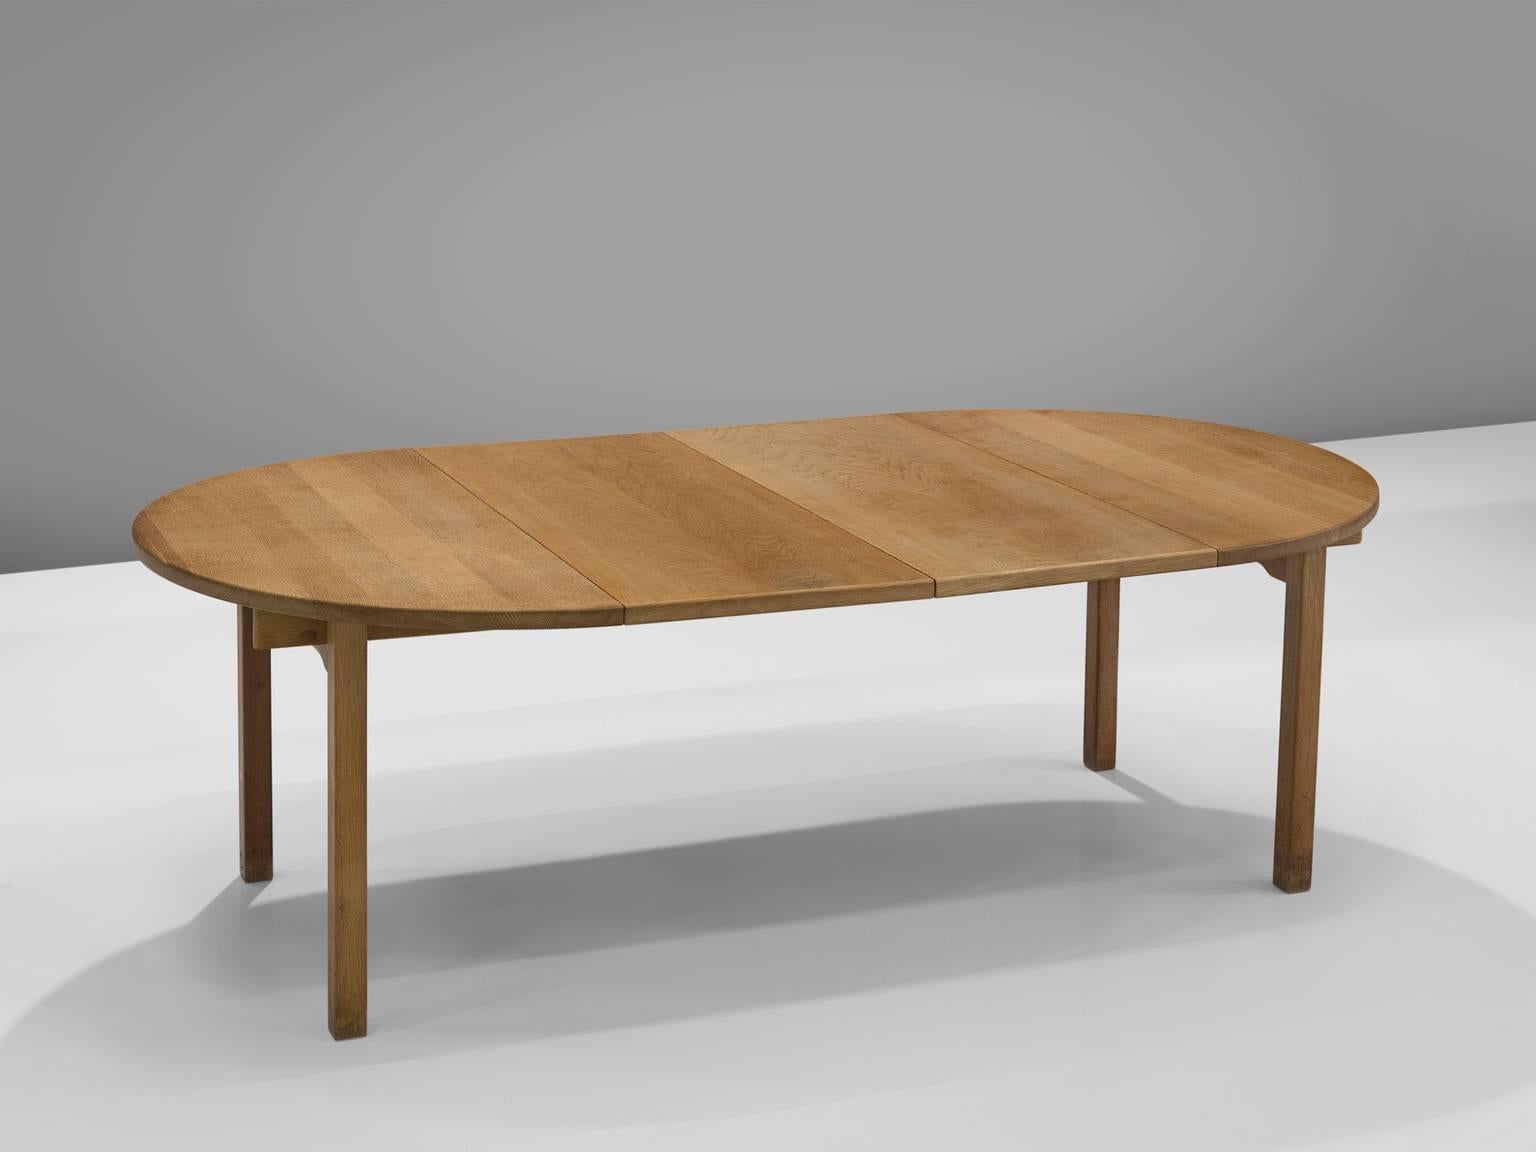 Kurt Østervig by KP Møbler, oak, Denmark, 1960s.

This extendable table in solid oak was designed in the 1960s by Kurt Østervig. The Danish design is solid, modest and well-constructed. The table can be extended or used as a circular, small kitchen